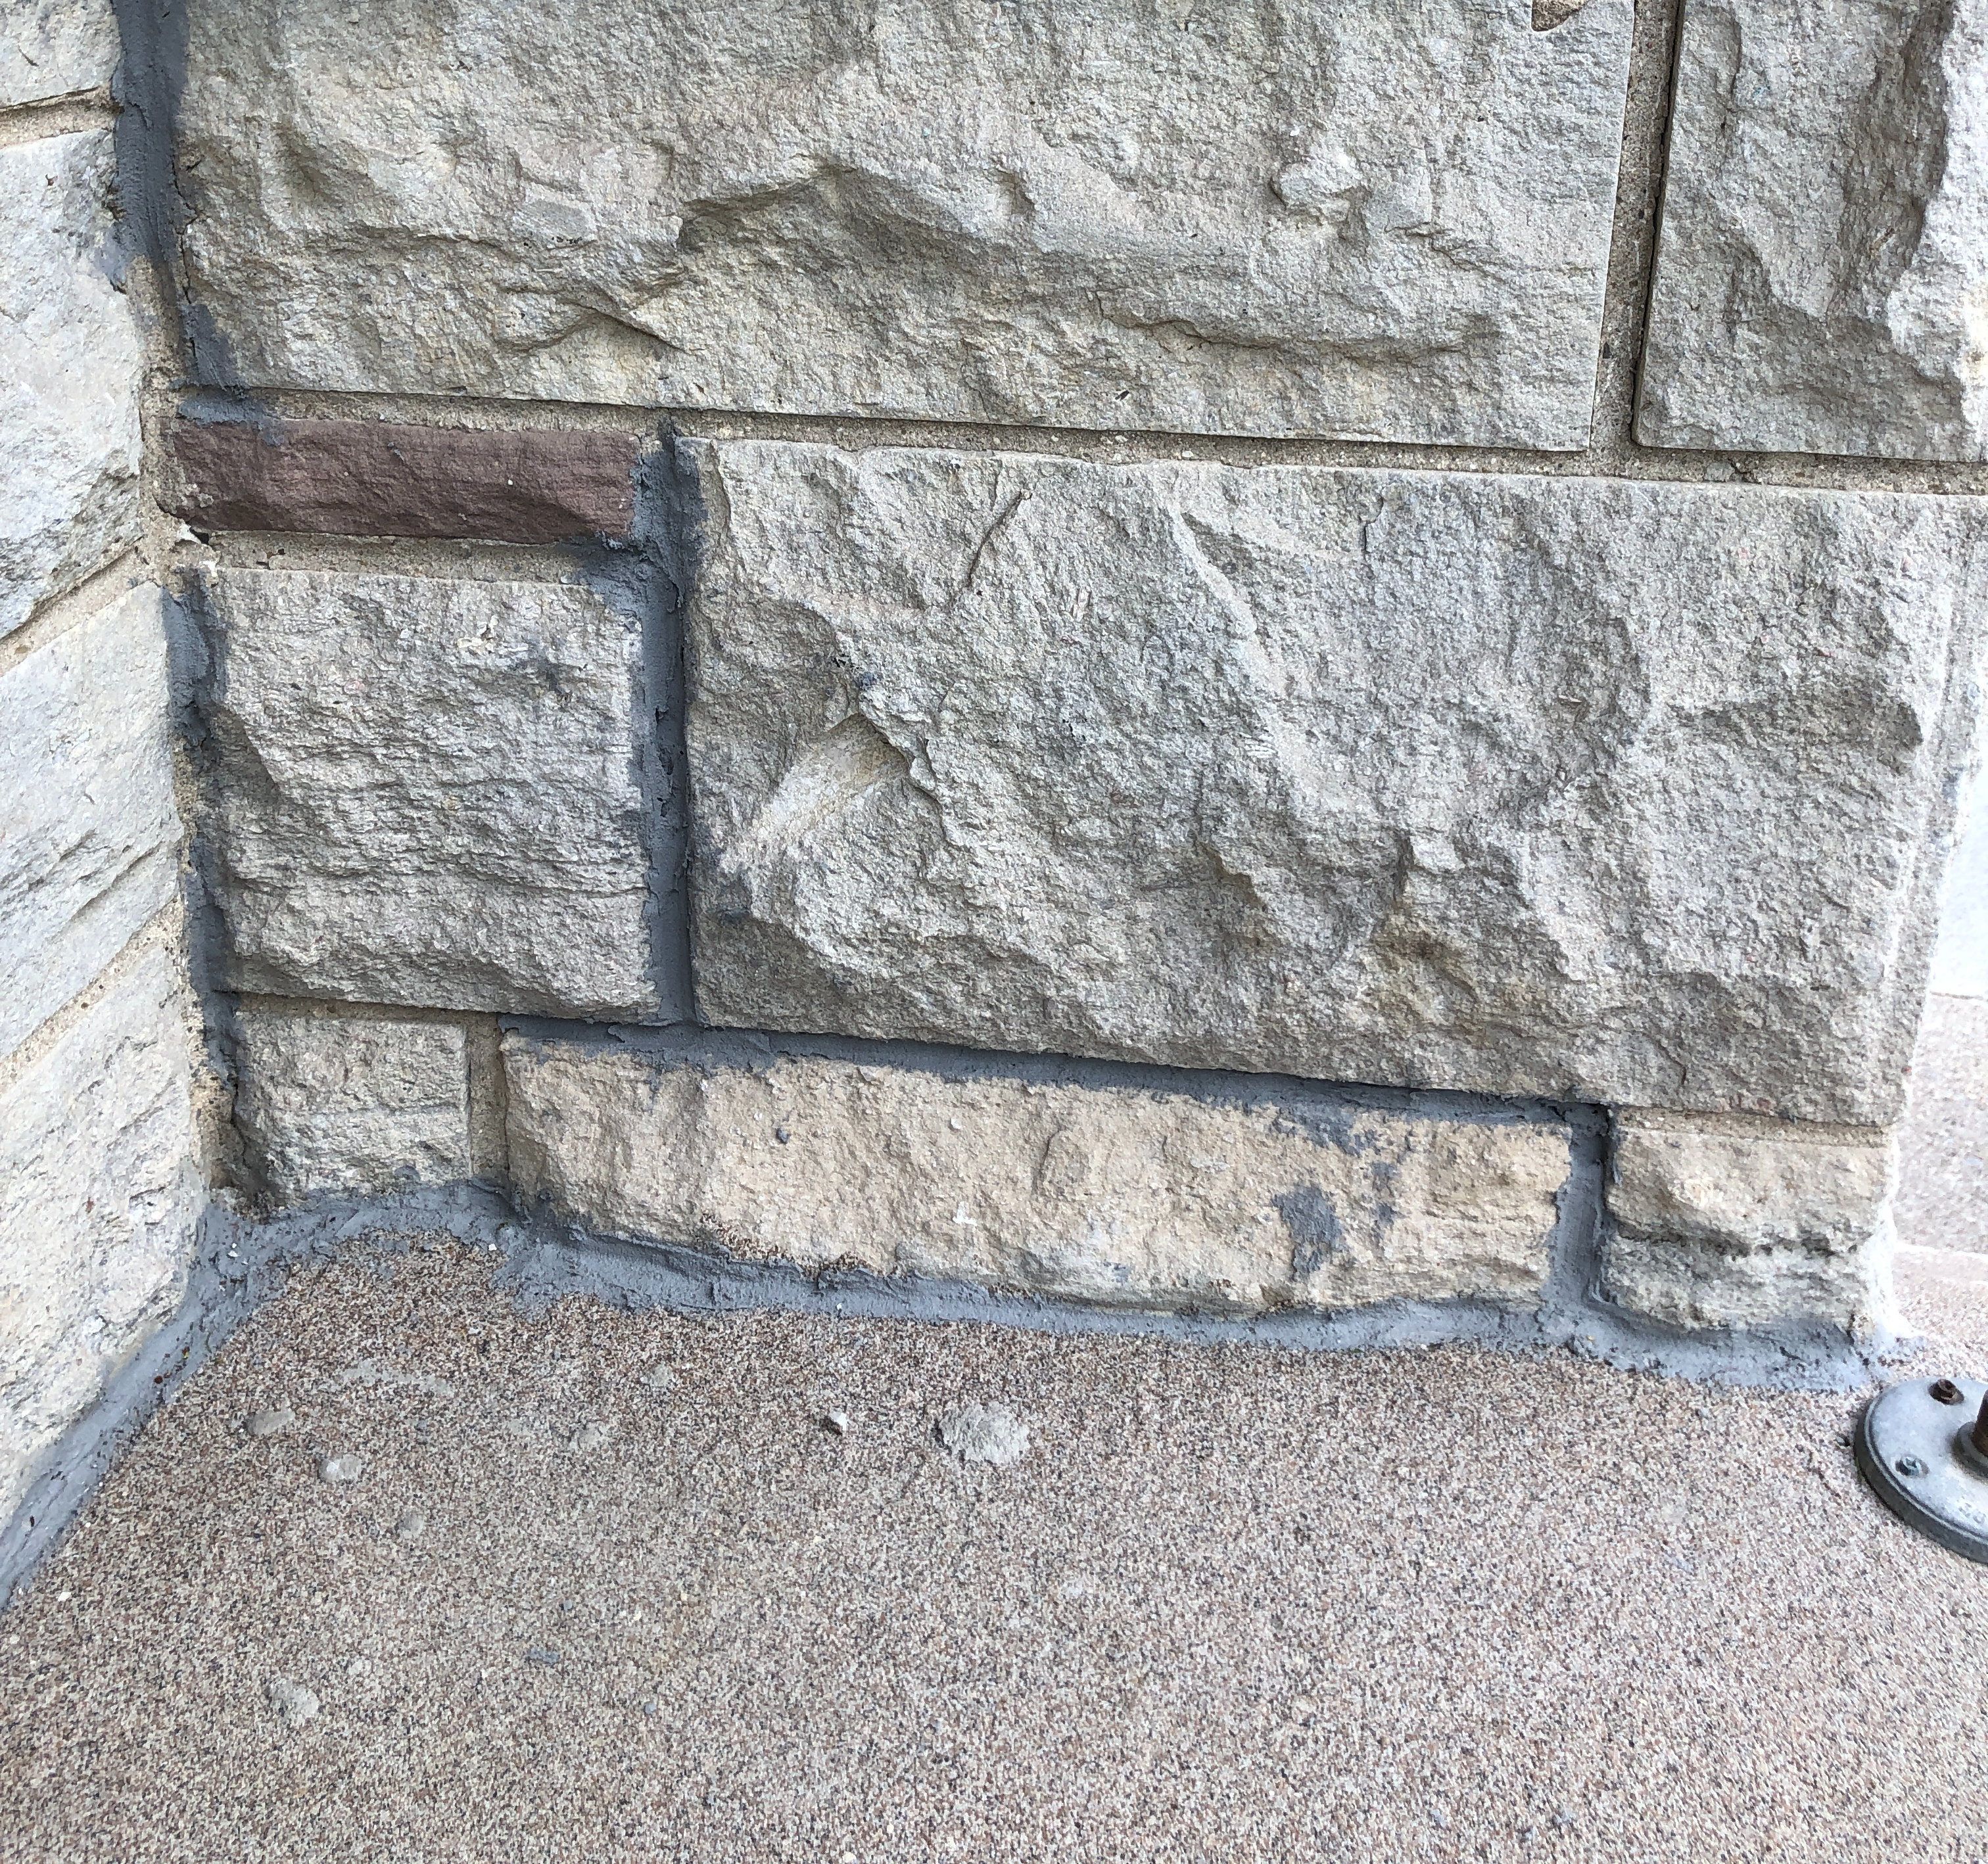 Stone wall on our front porch, with new mortar.